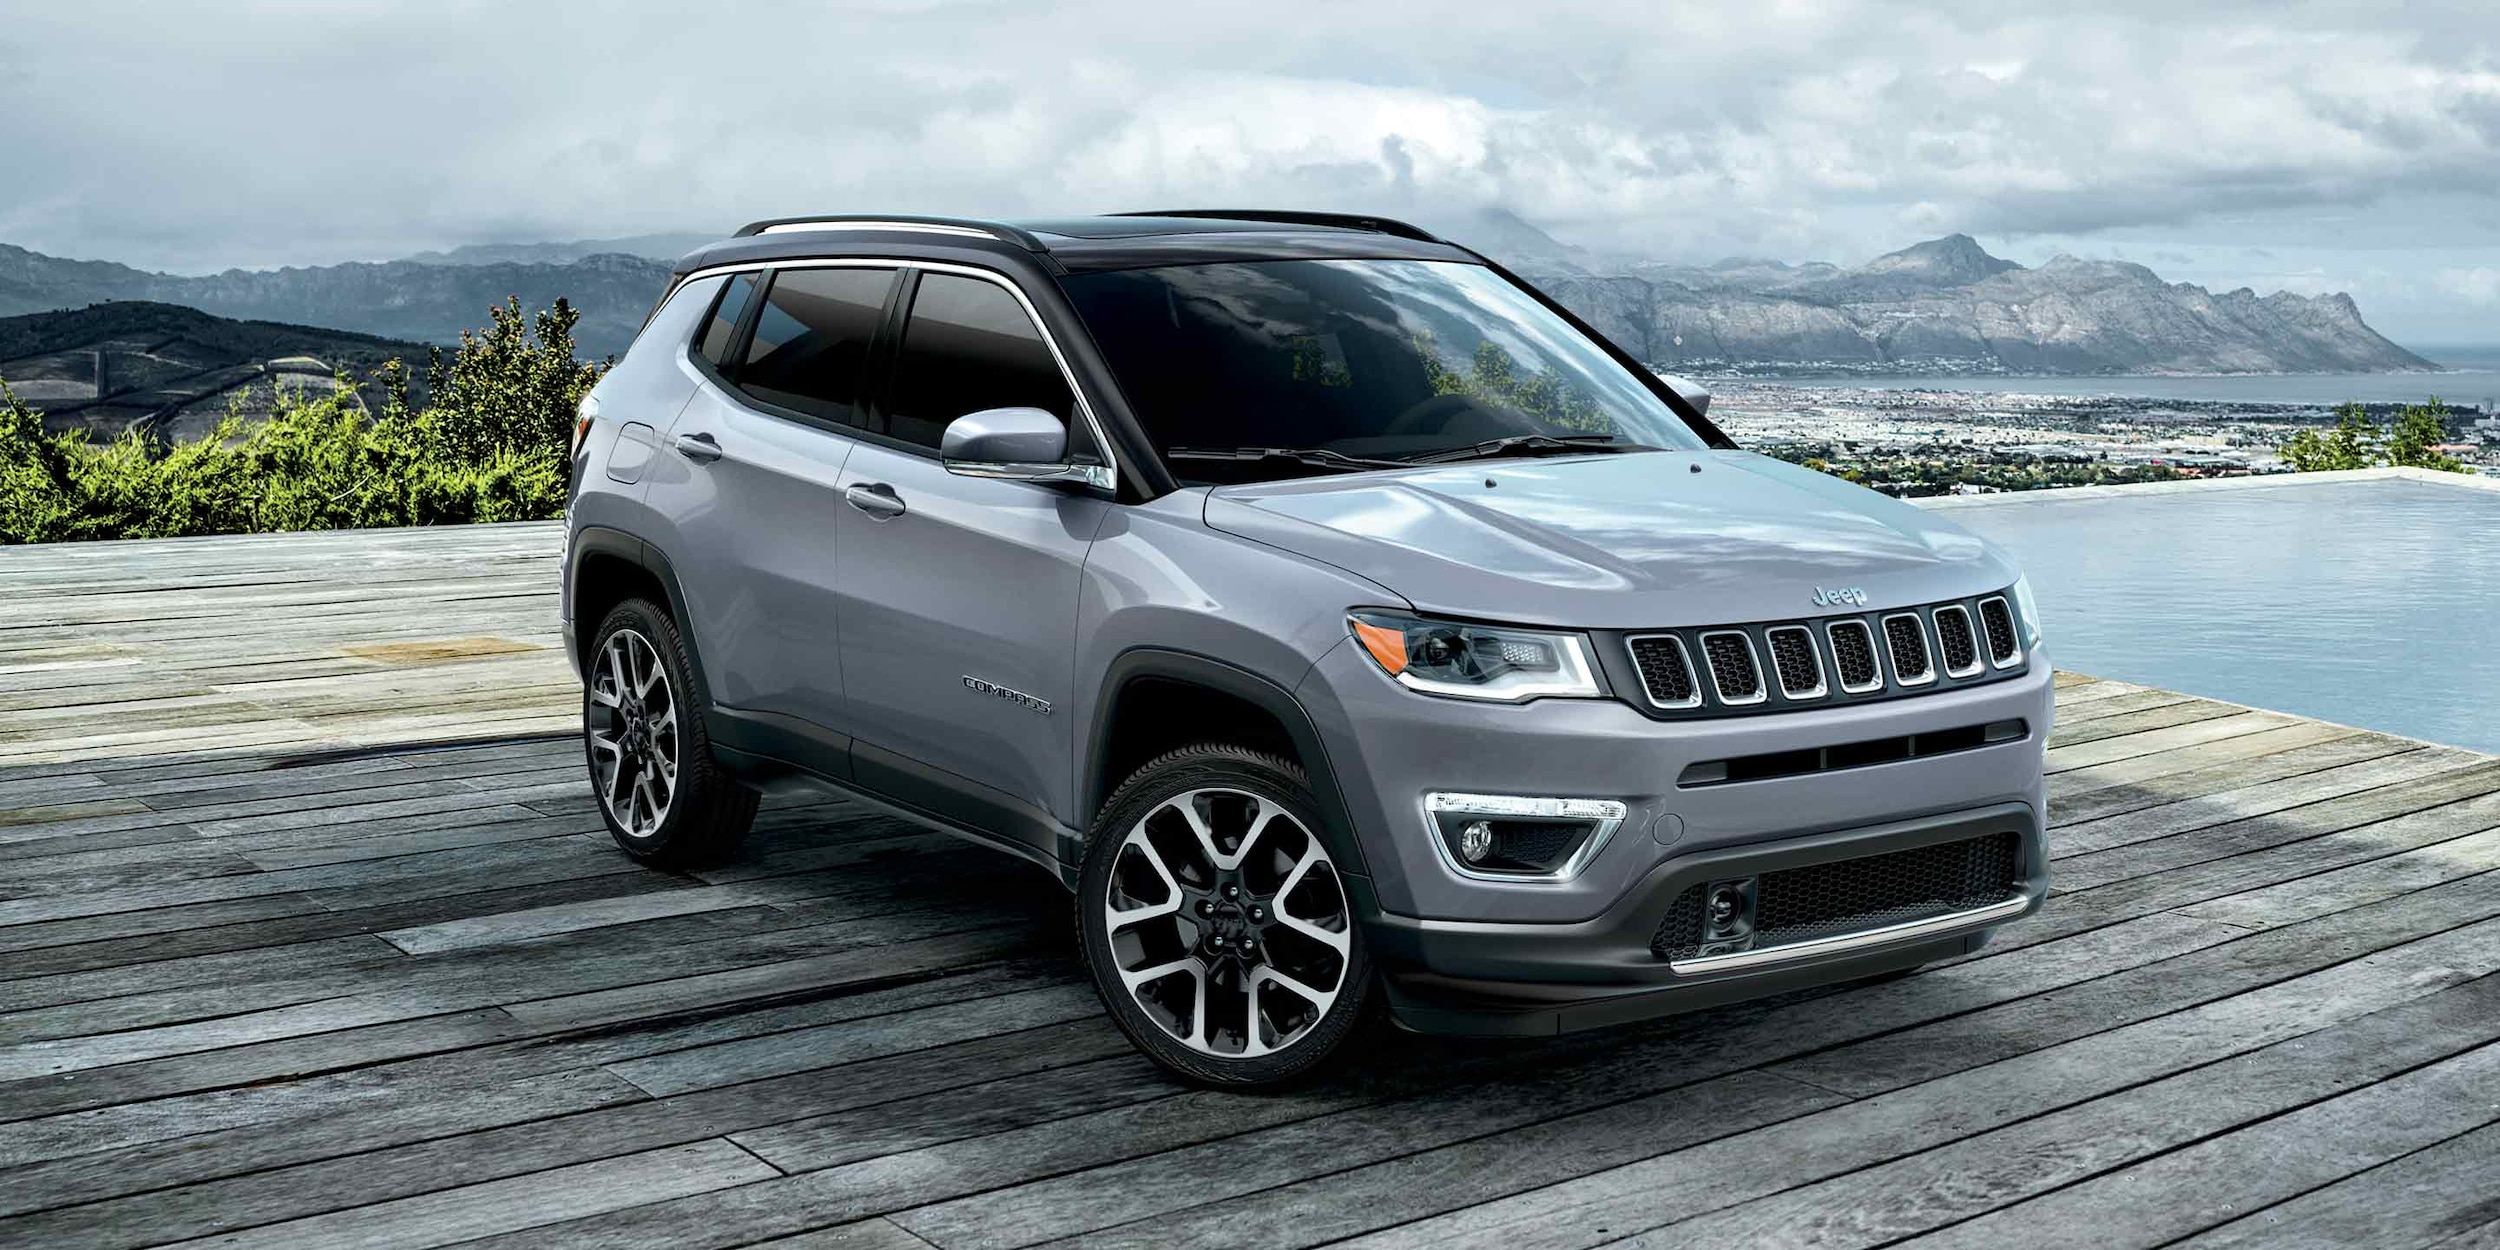 2020 Jeep Compass Leasing Financing in Summit NJ